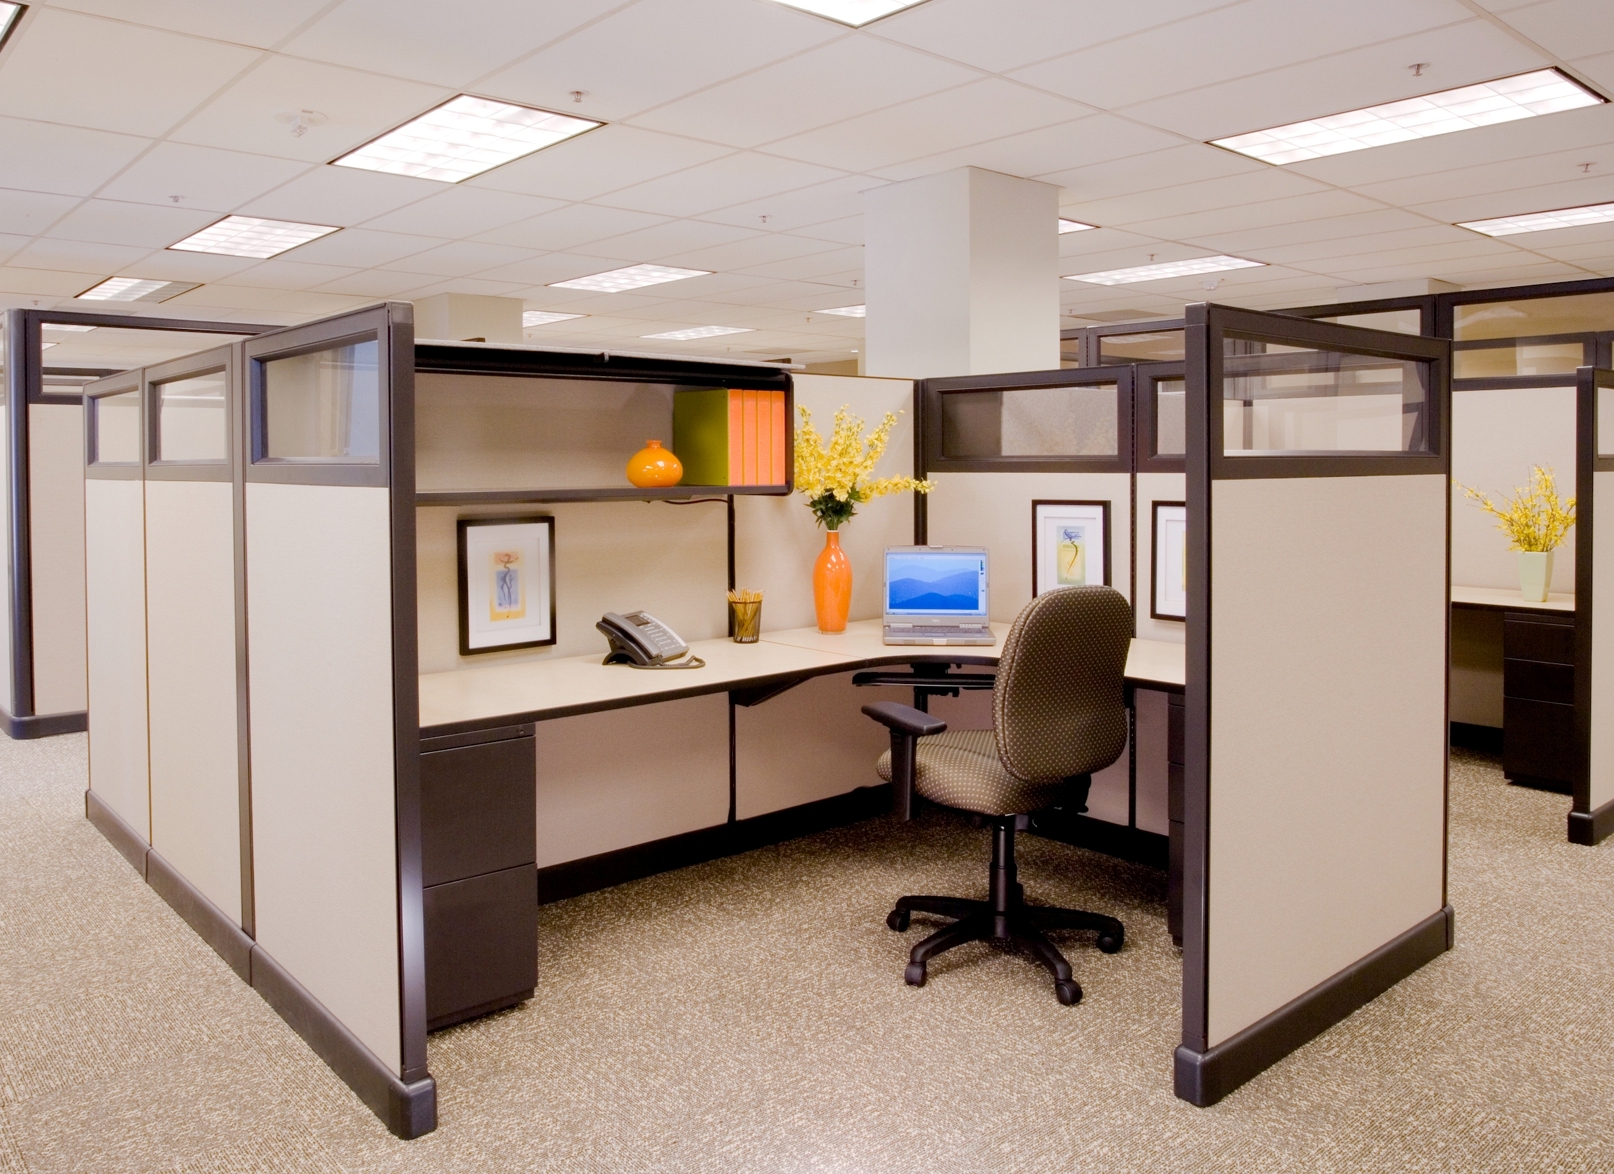 Do You Have A Cleaning Schedule For Your Cubicle Walls